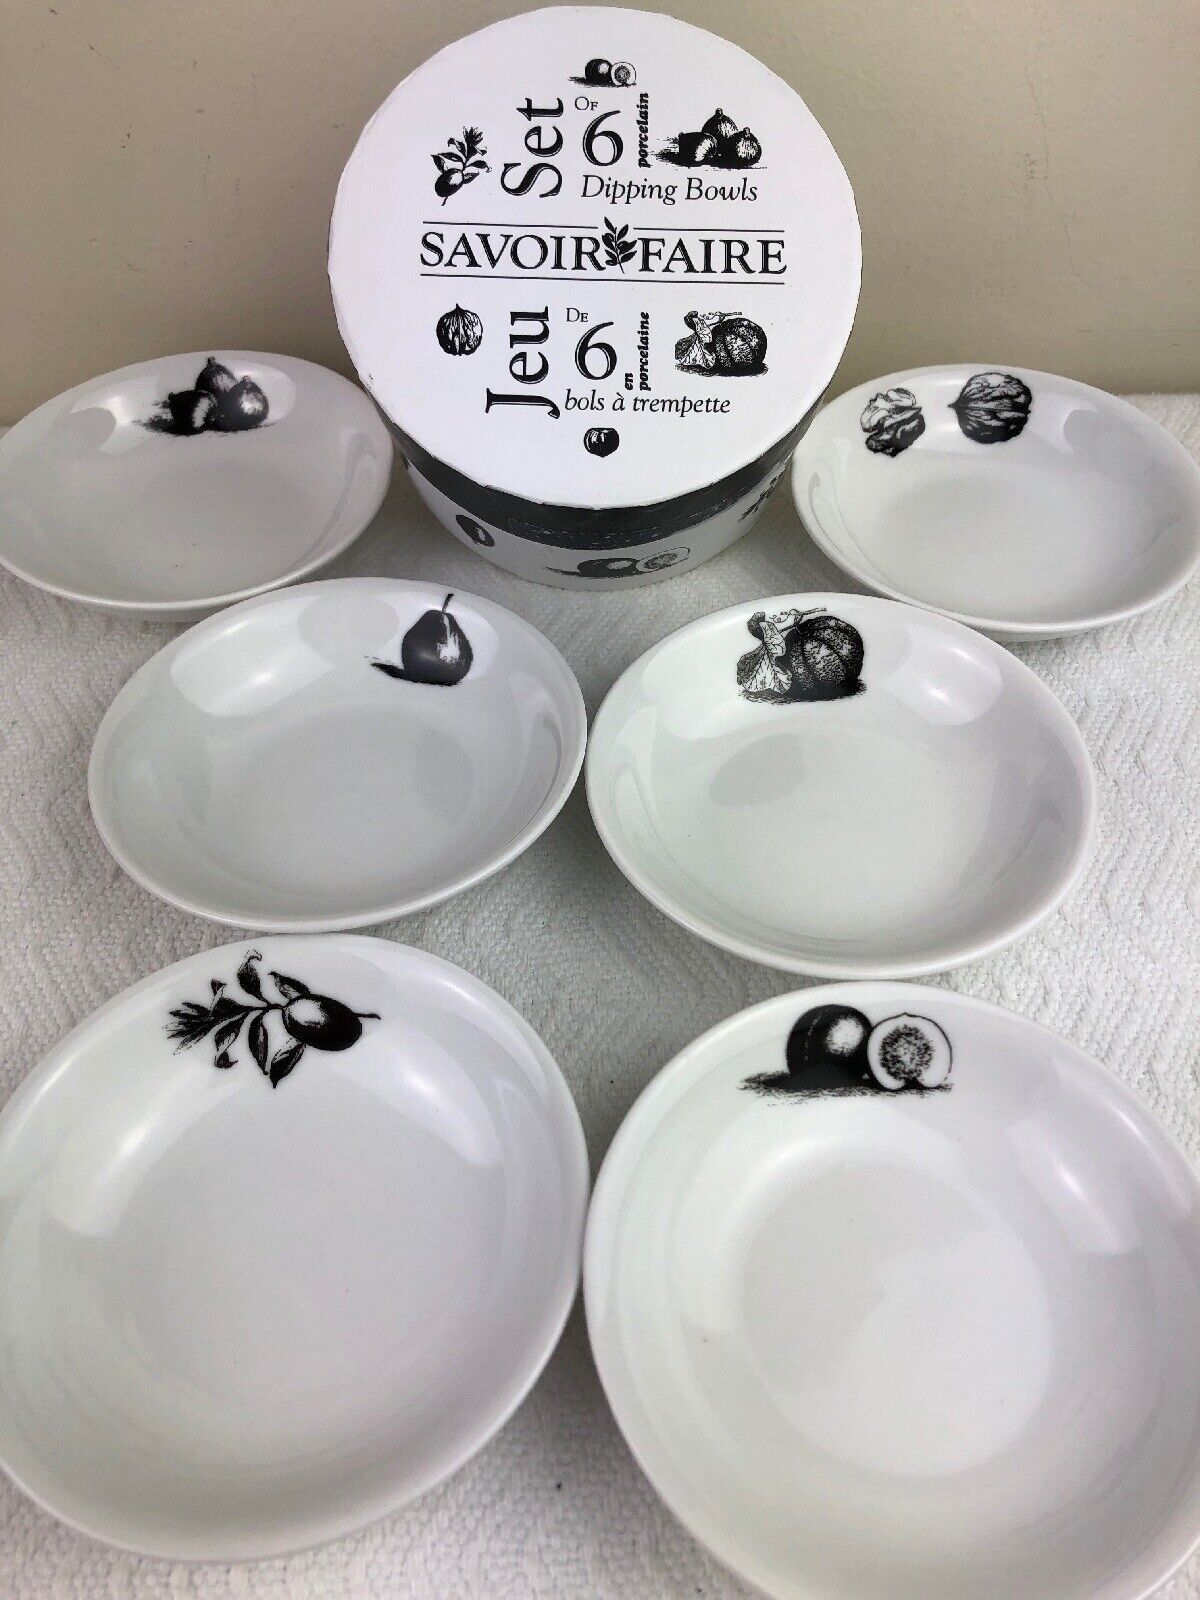 Porcelain BIA Savoir Faire Set of 6 Round Dipping Bowls Gift Boxed NEW BIA 985431G+D28